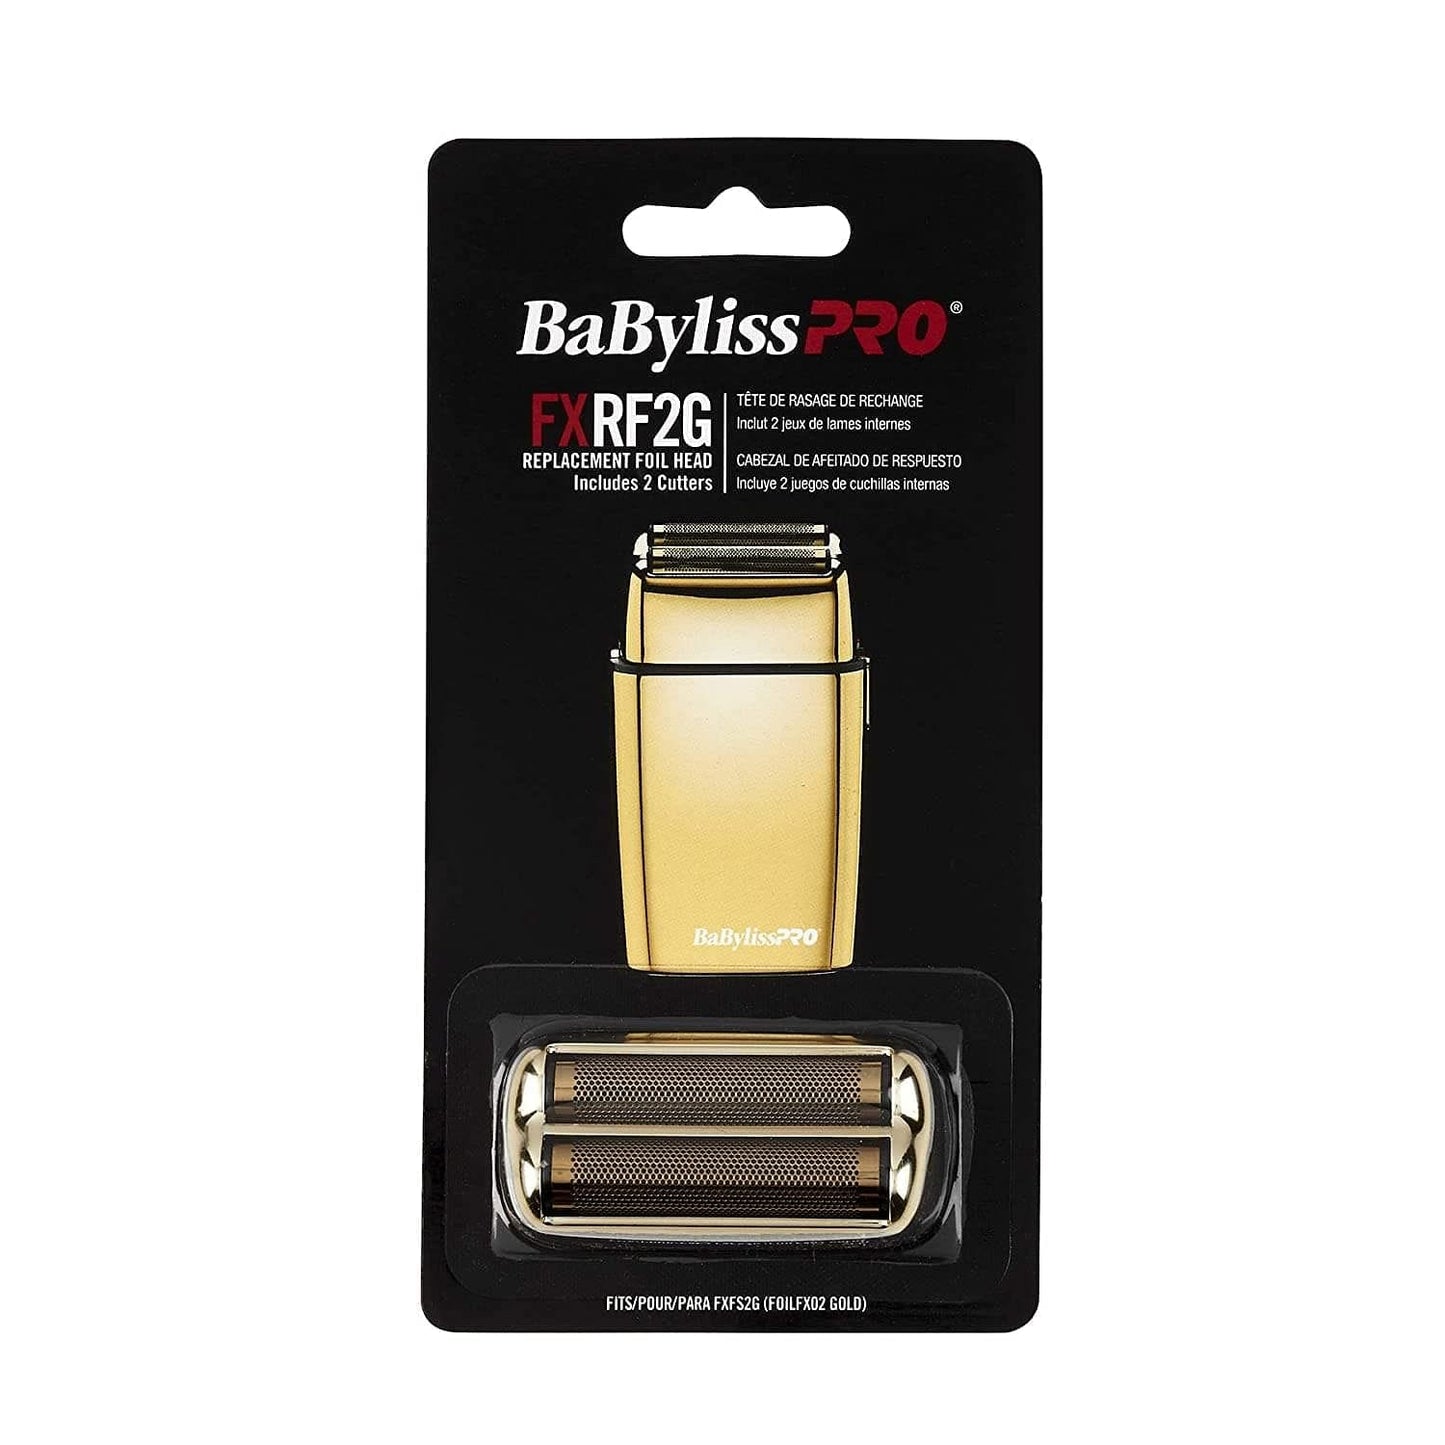 BaByliss Pro Replacement Double Foil Head & Cutters for Gold Shaver FXRF2G - Goldy TV